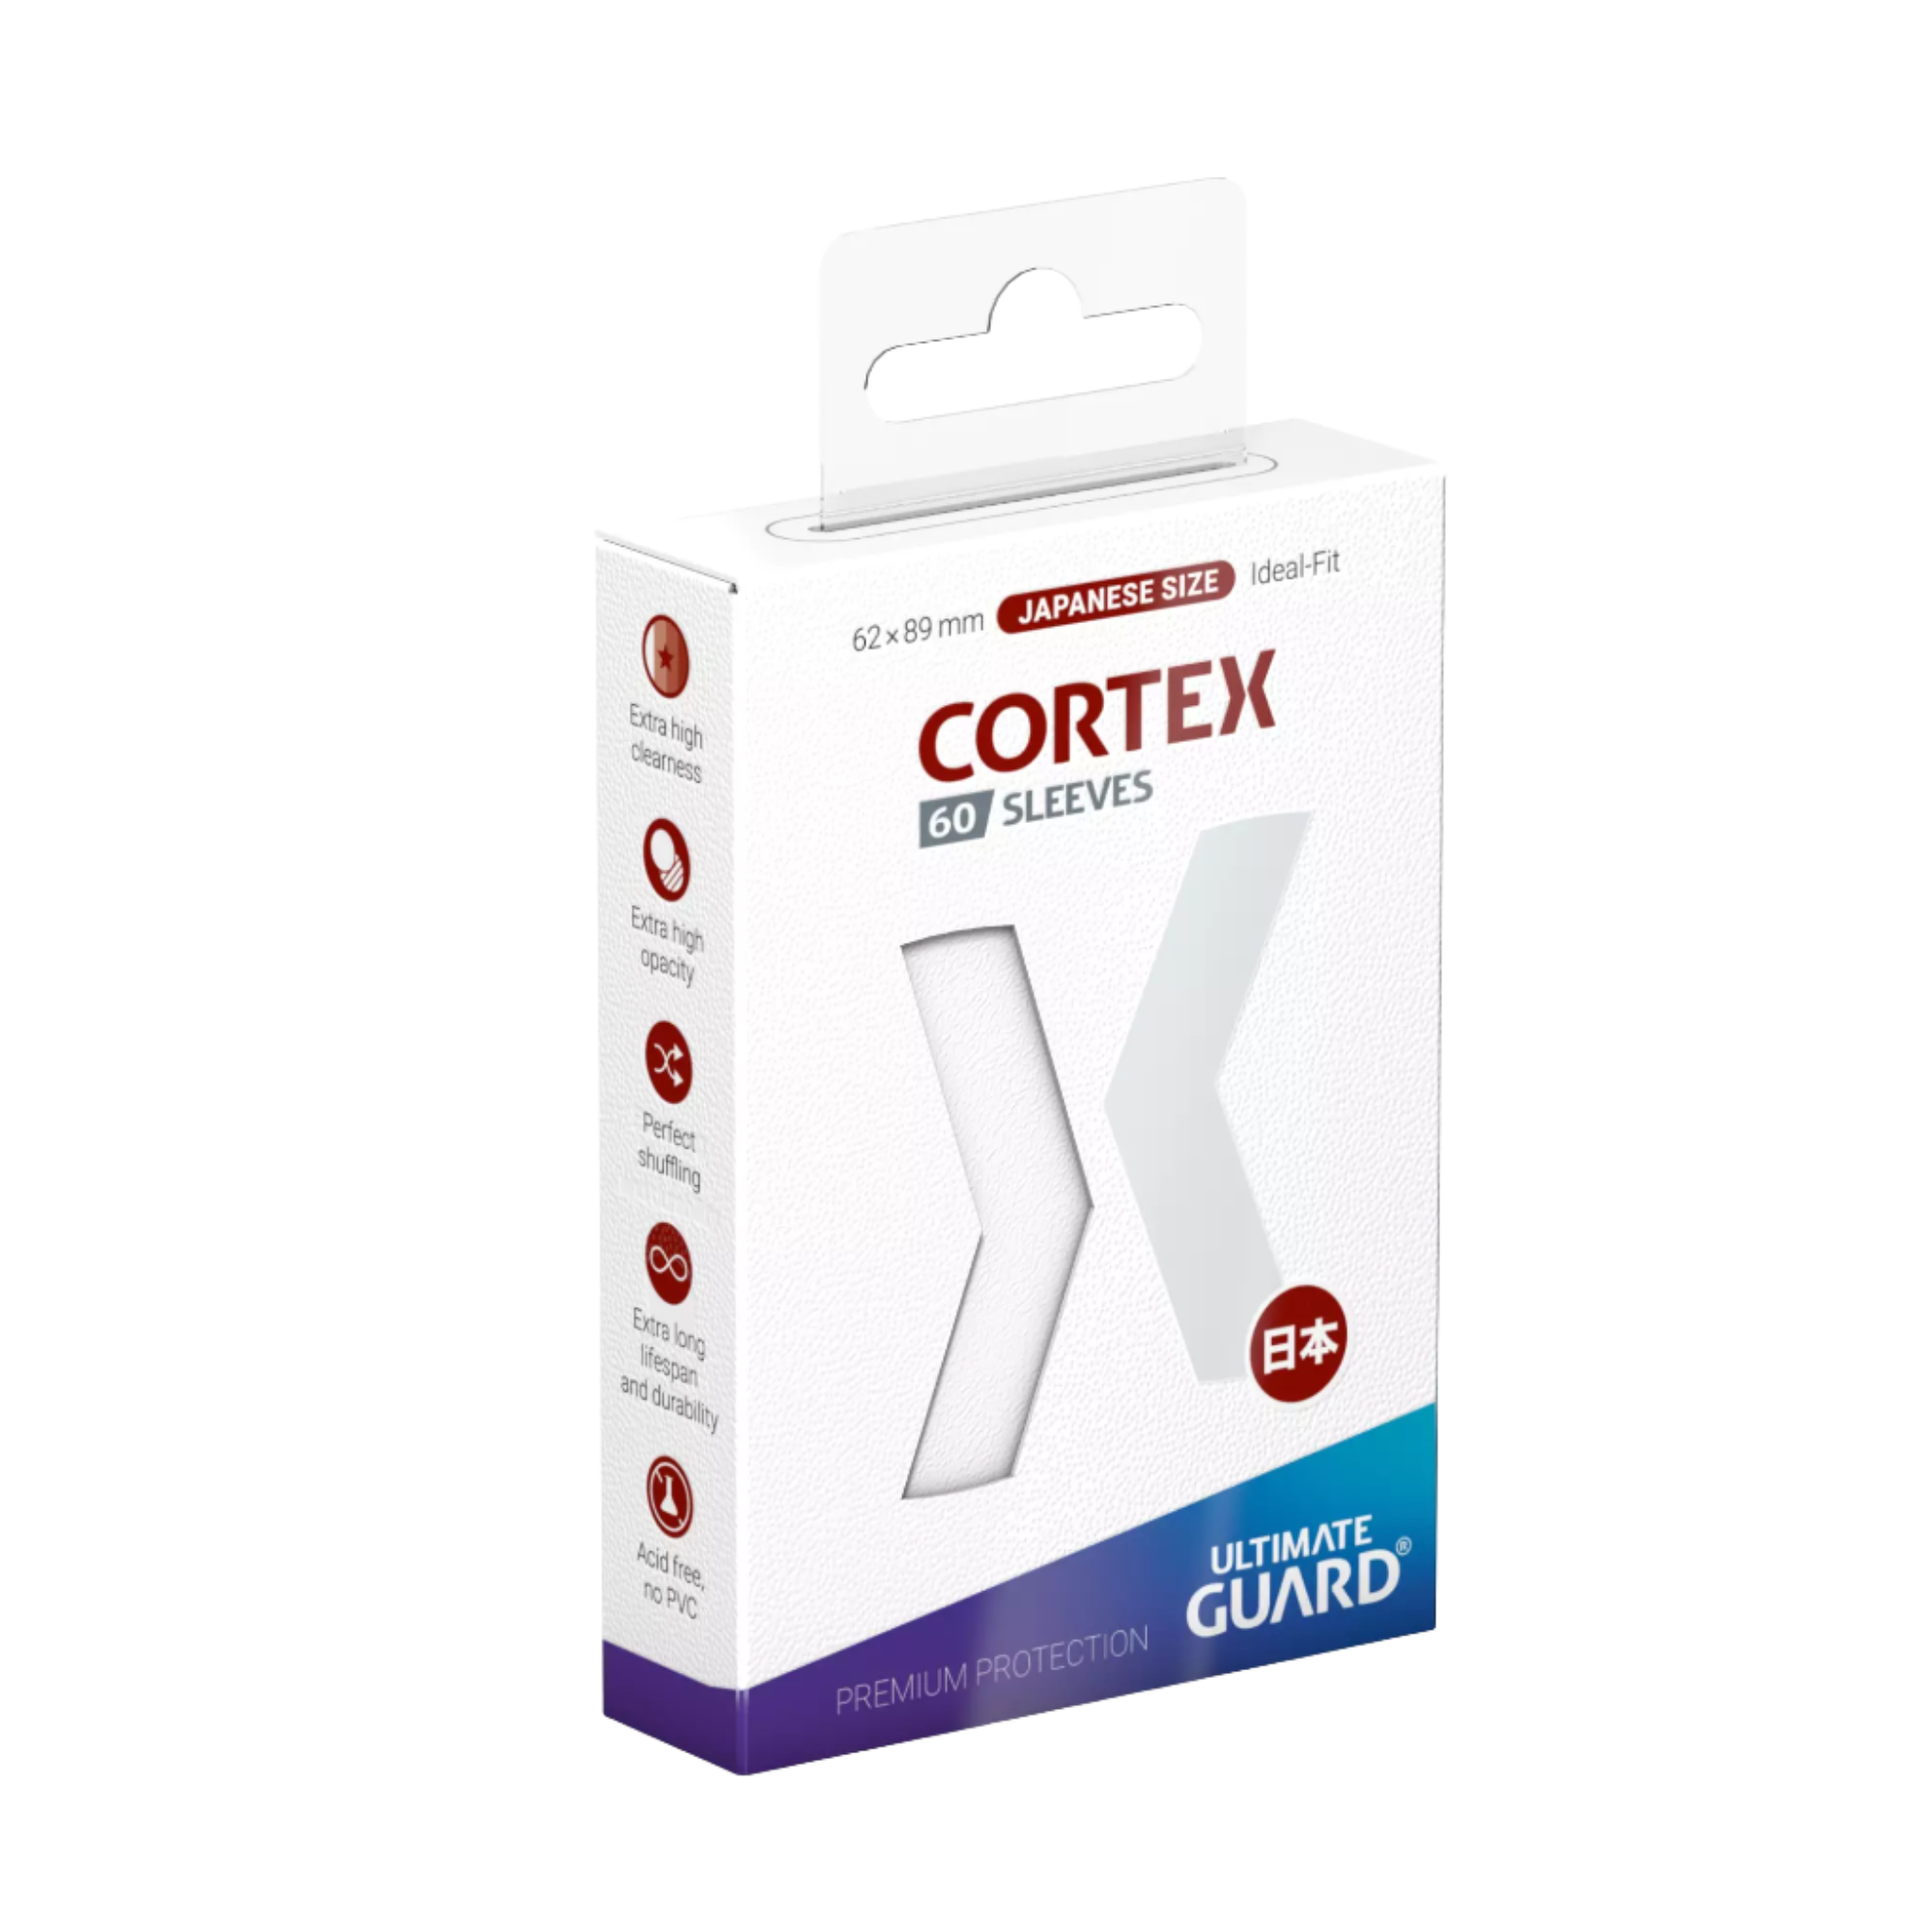 Ultimate Guard - Cortex Sleeves - Japanese Size - Ideal-Fit - White - 60pk